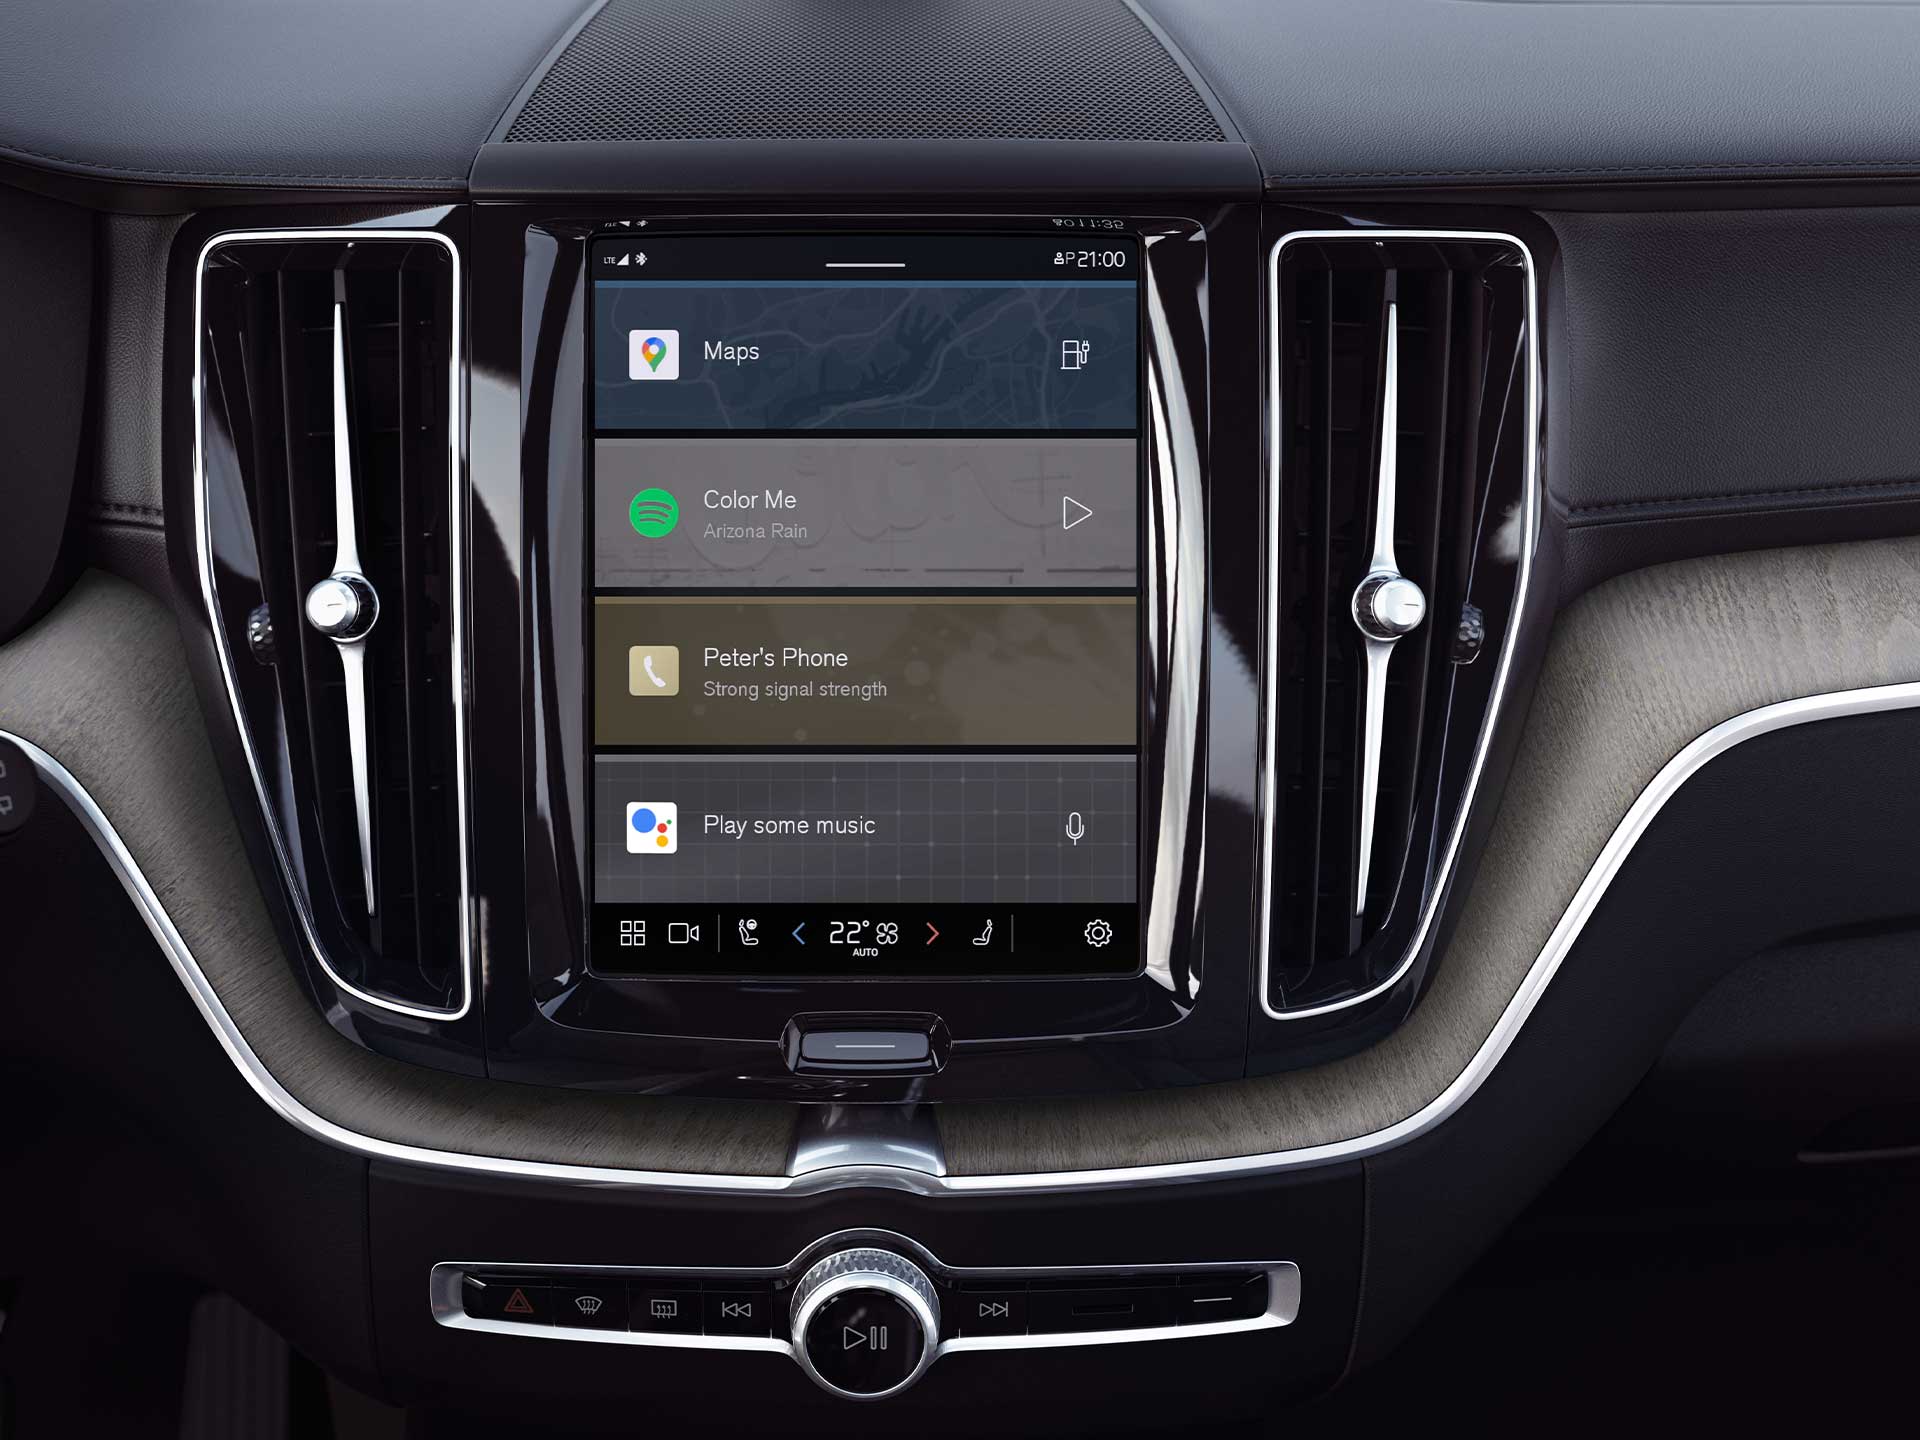 Infotainment centre display on a Volvo XC90.